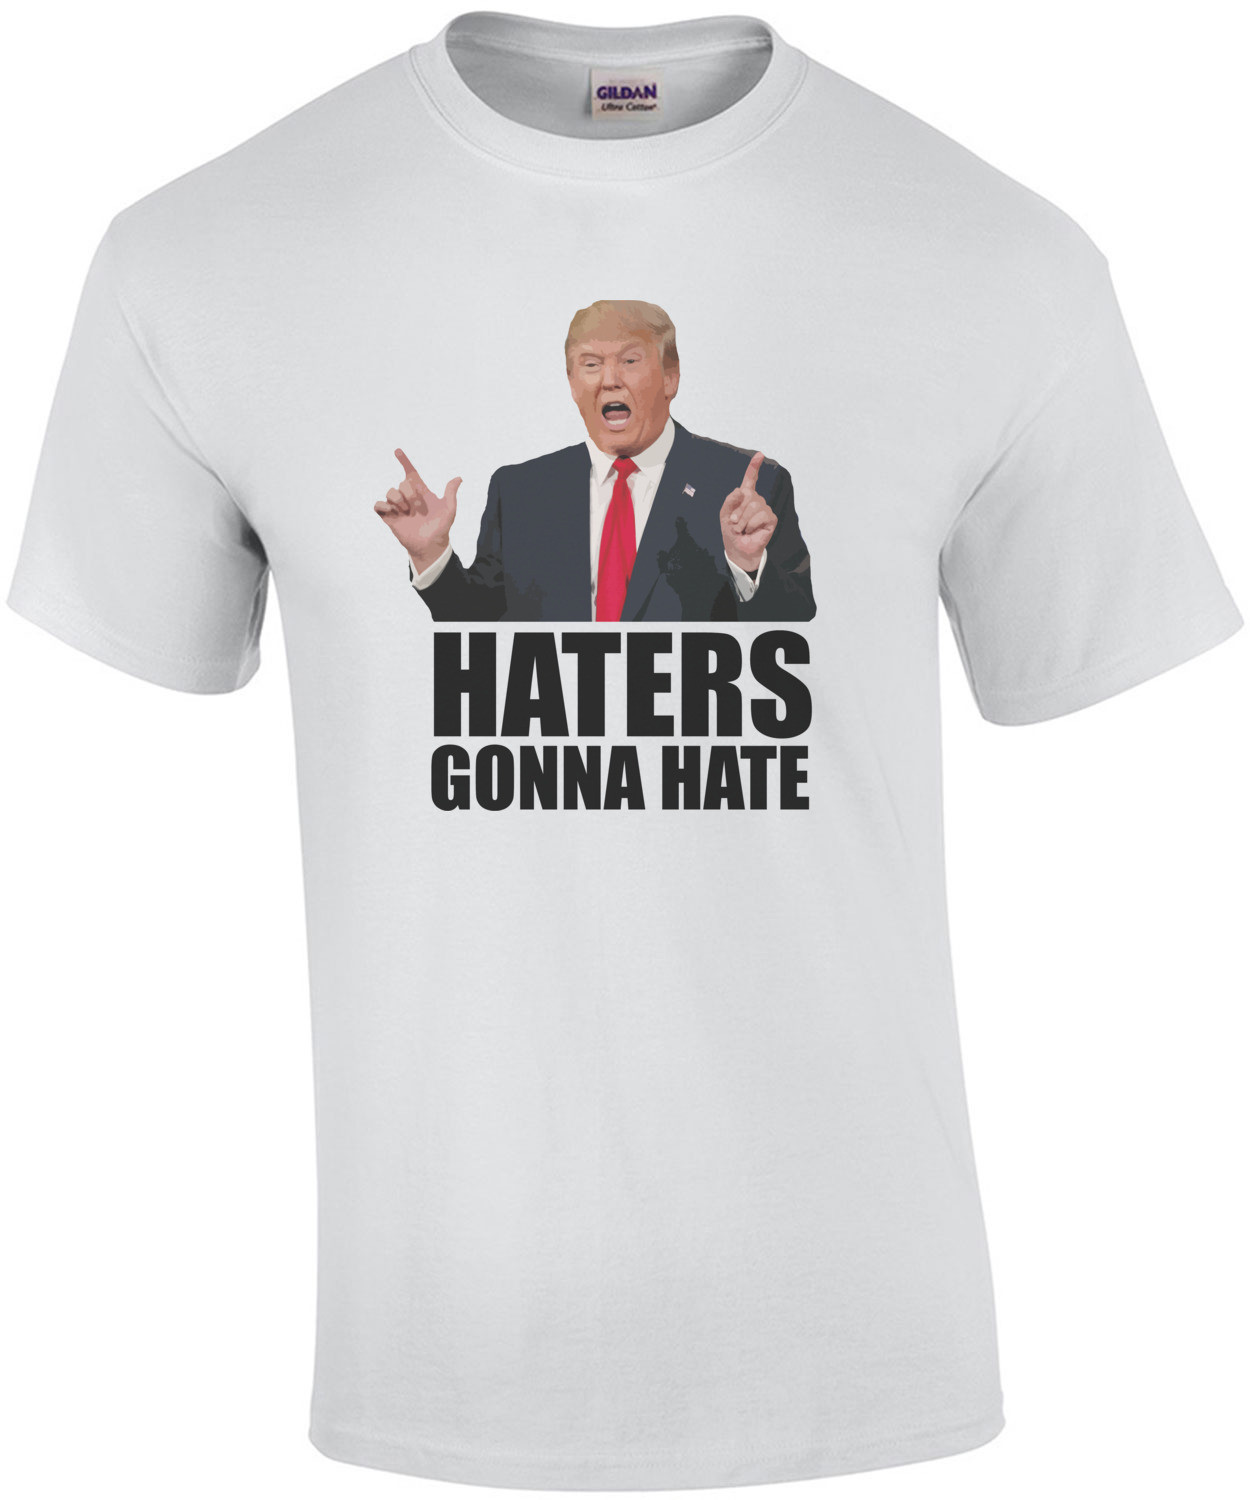 Haters gonna hate - Donald Trump T-Shirt